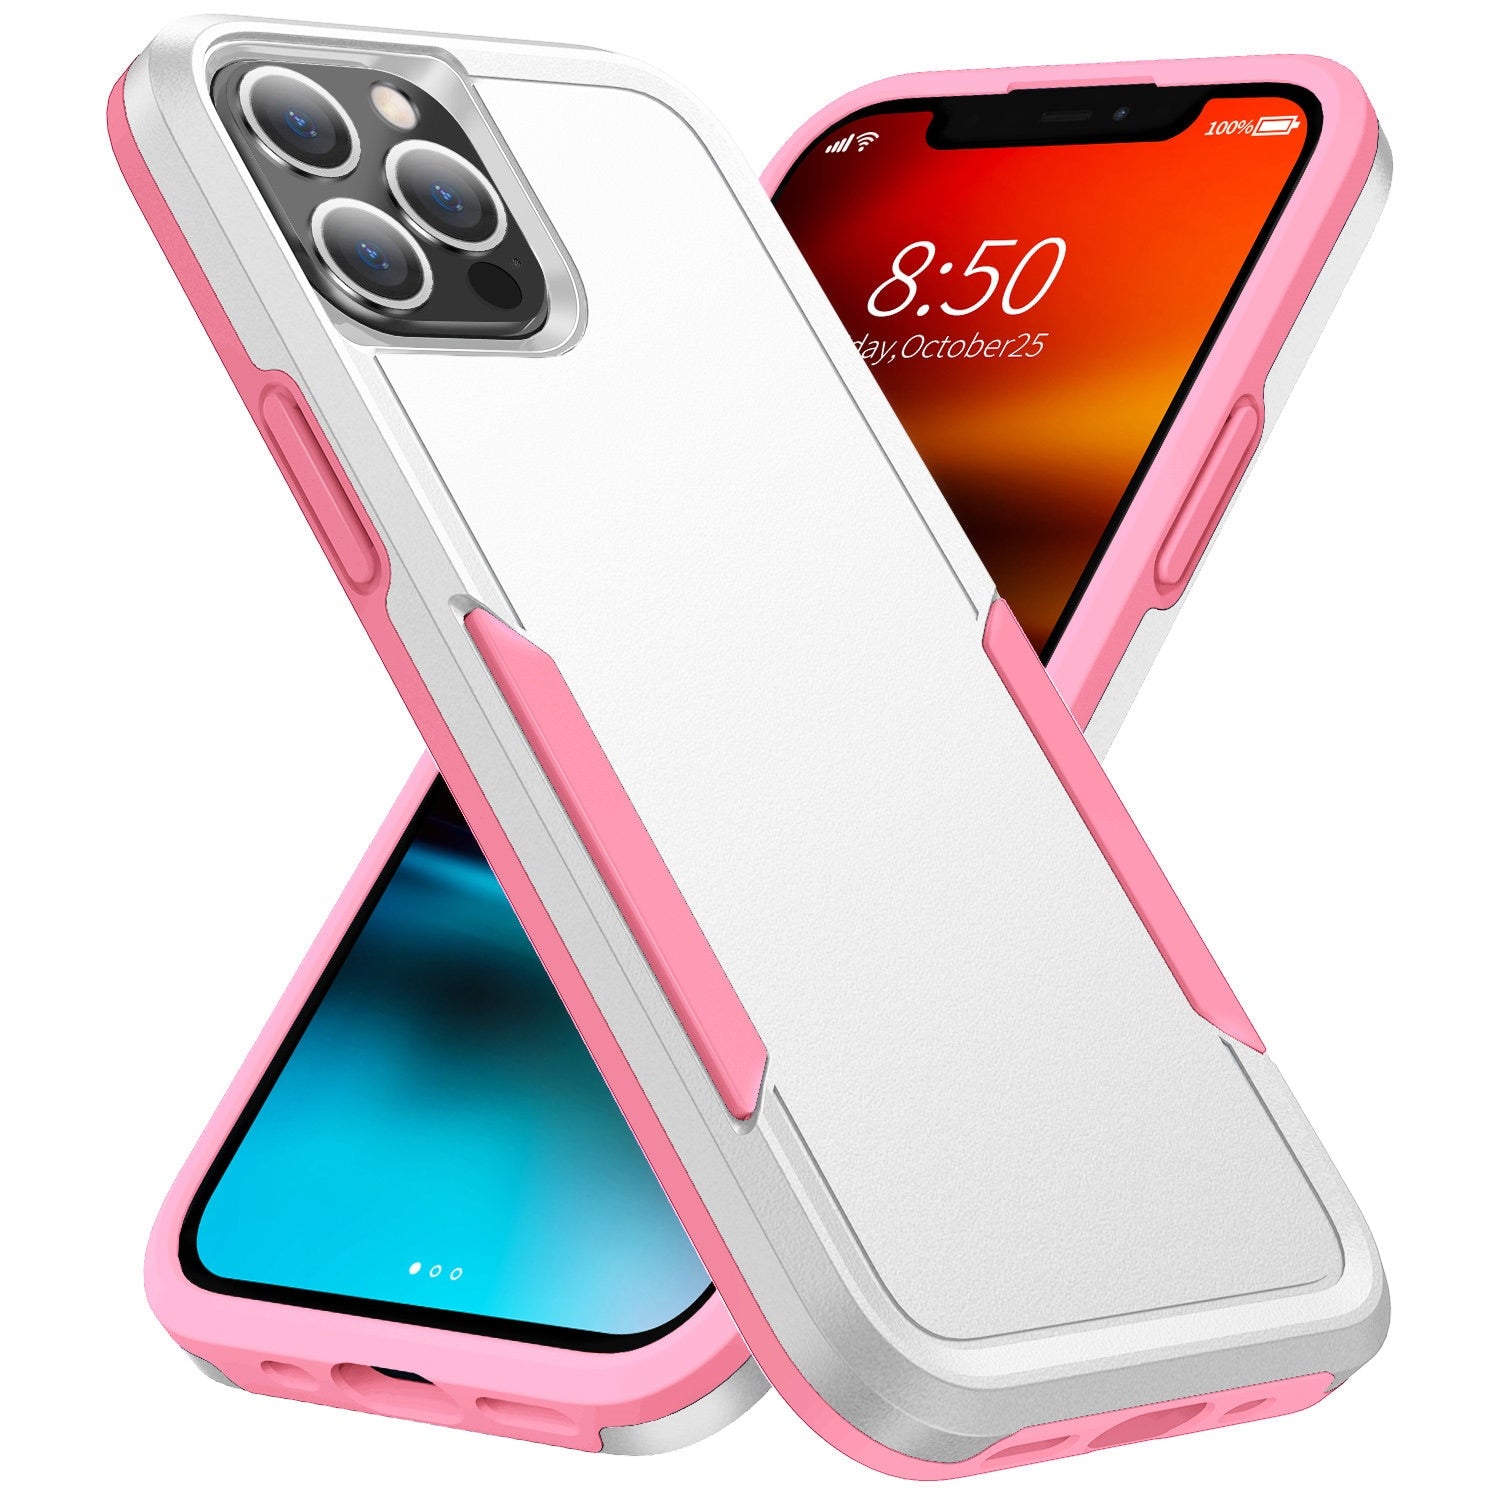 White Color Case for iPhone 11 12 13 Pro Max Case, Bumper Shockproof Armor Heavy Duty Hard Protective Case for iPhone 13 Pro Max (2021) - 380230 for iPhone 6 6S / white / United States Find Epic Store